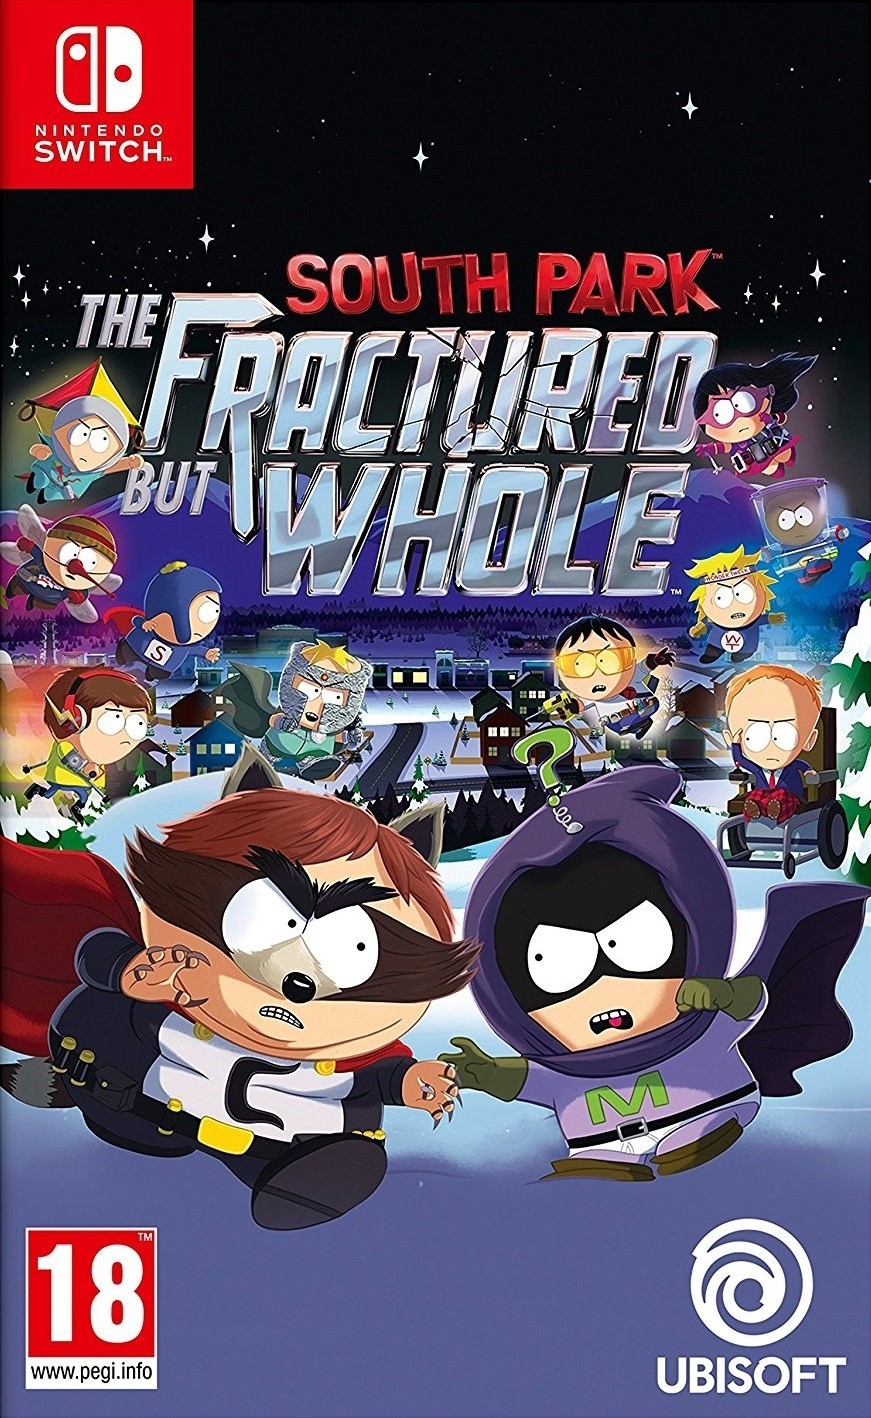 South Park: The Fractured But Whole (Switch), Ubisoft San Francisco